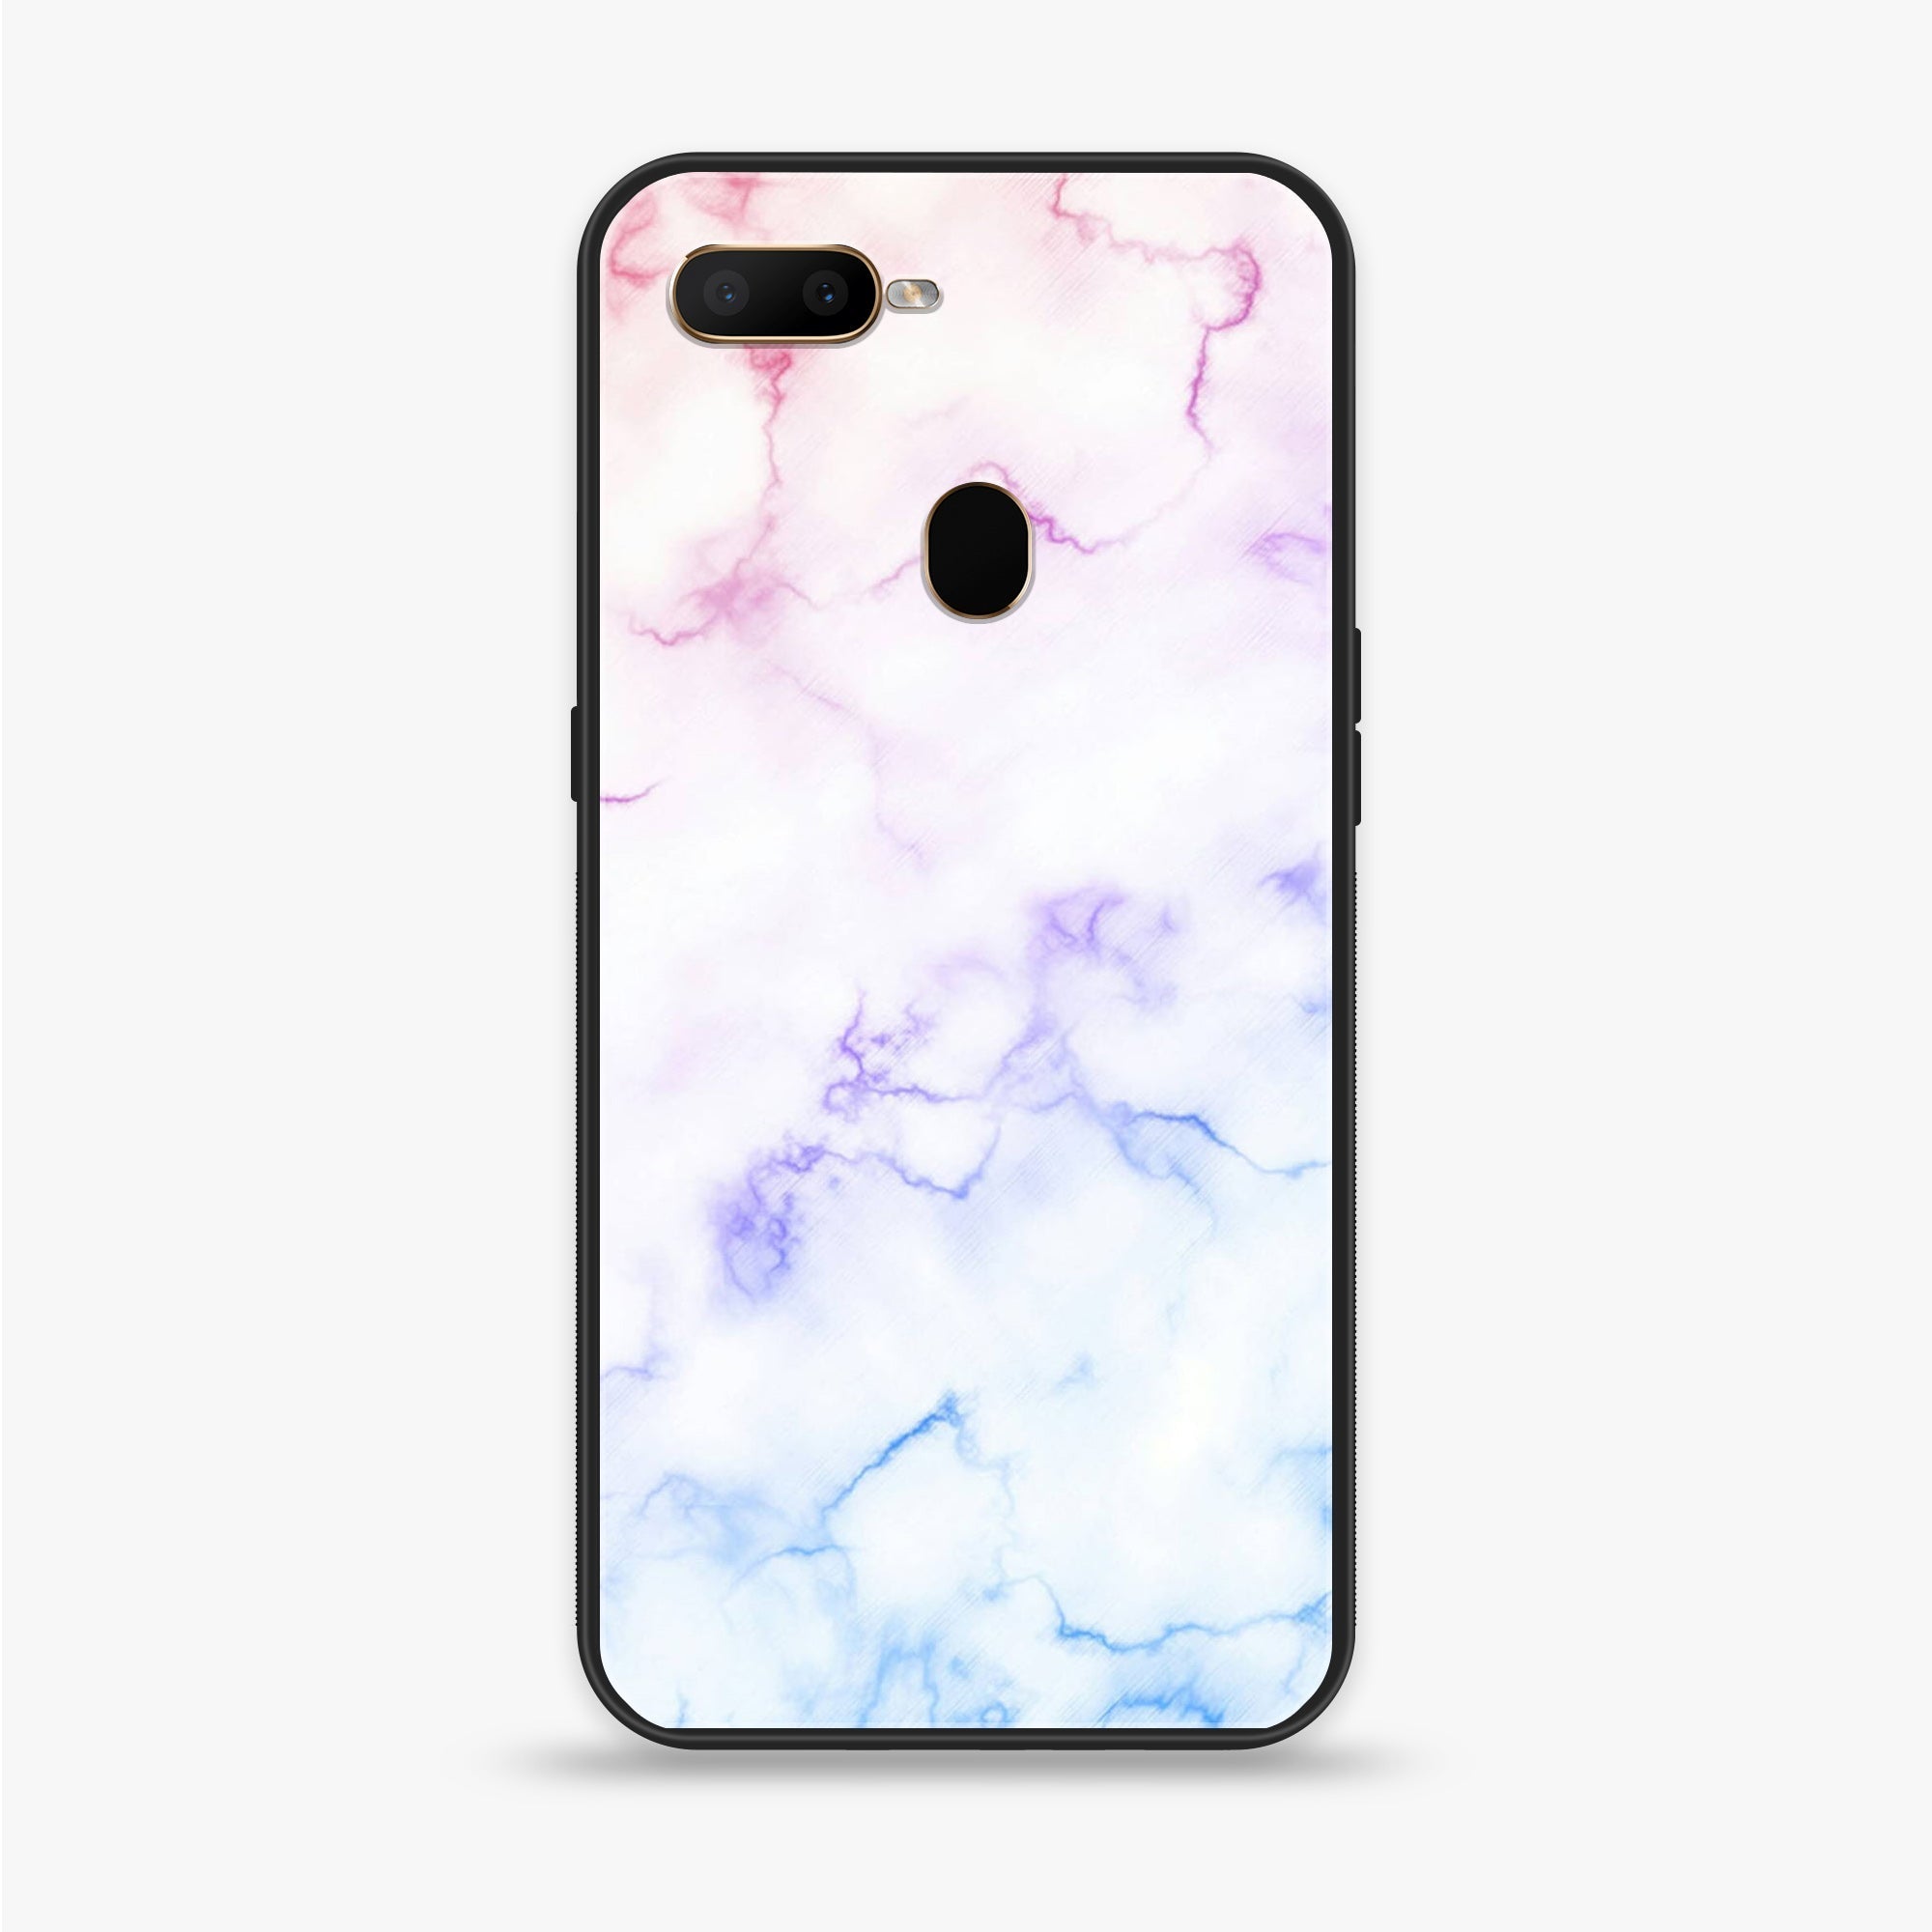 Oppo A7 - White Marble Series - Premium Printed Glass soft Bumper shock Proof Case